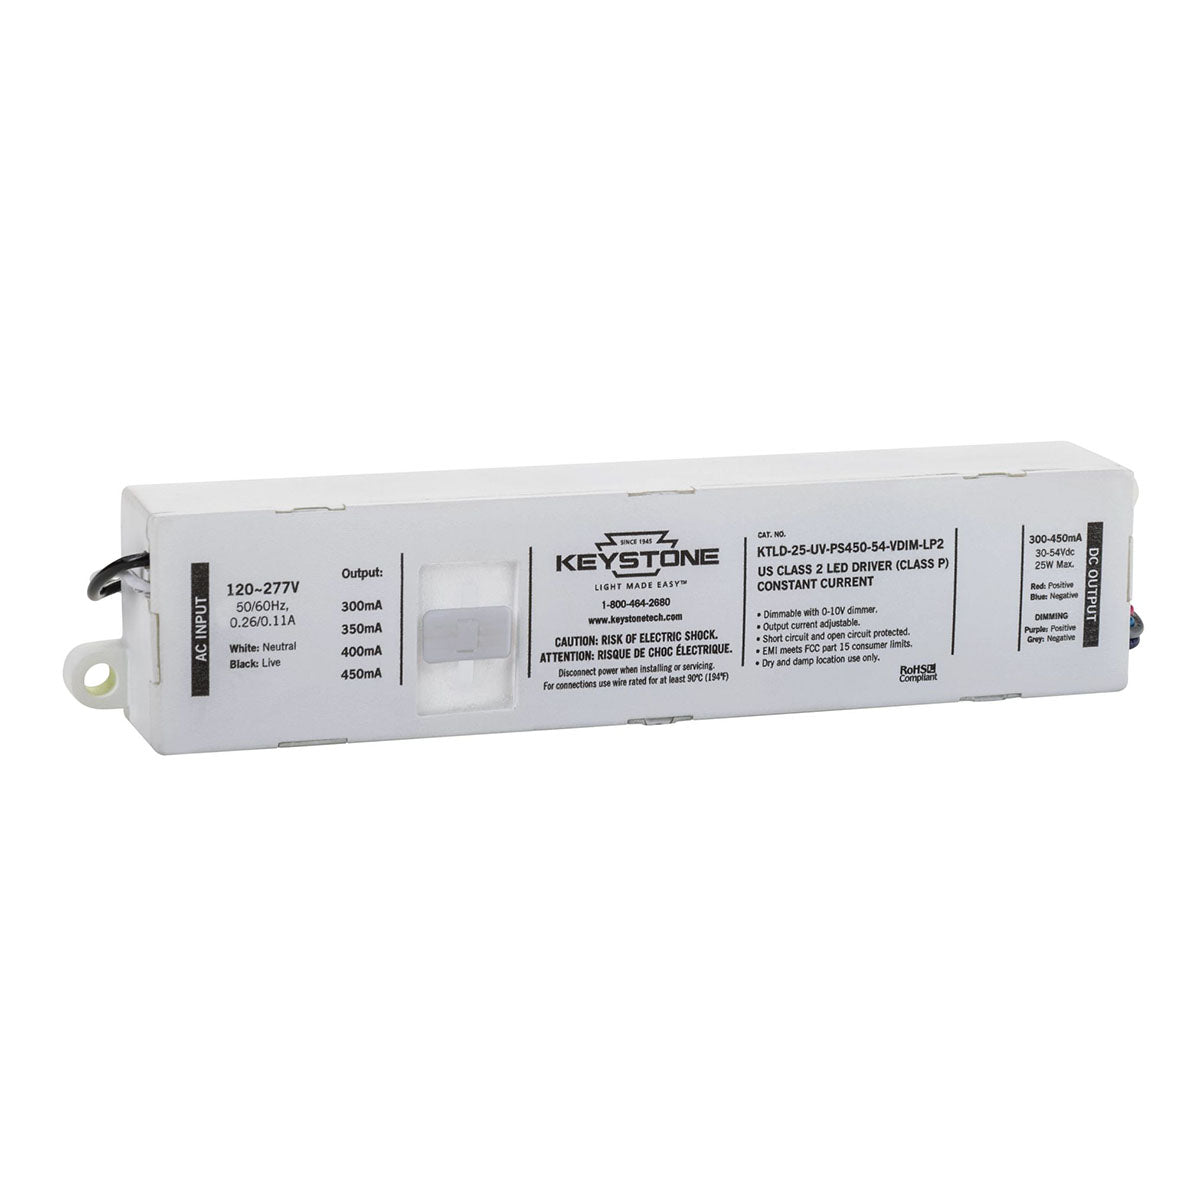 Power Select LED Driver, 25W, Adjustable Constant Current 300-450mA, 0-10V Dimming, 120-277V Input